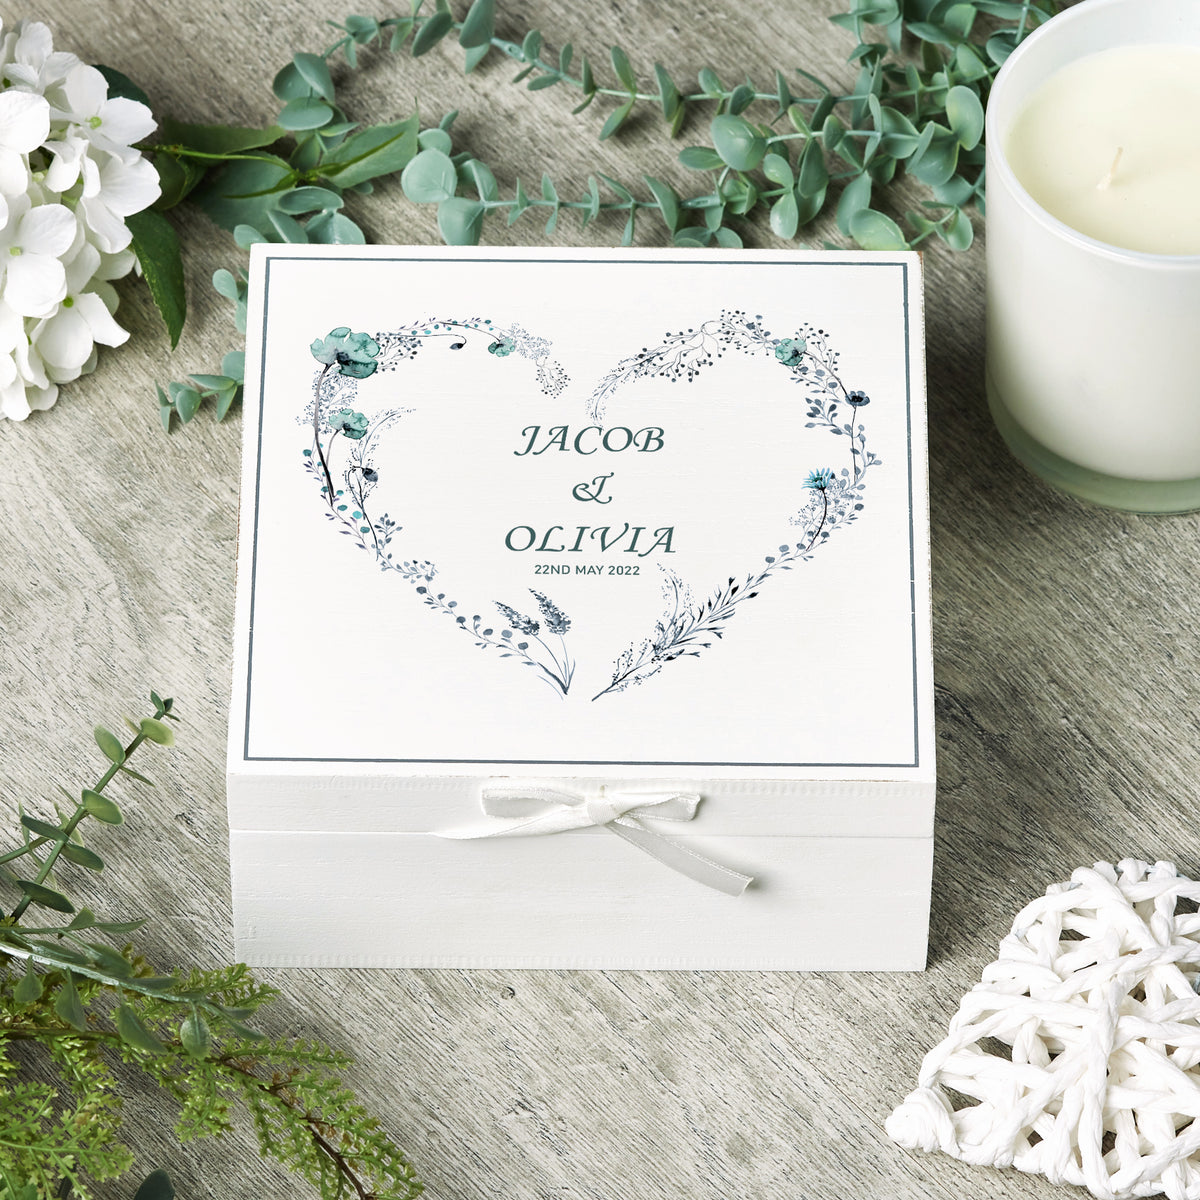 Personalised Wedding Day Vintage Wooden Keepsake Box Gift With Dusty Blue Floral Heart Print